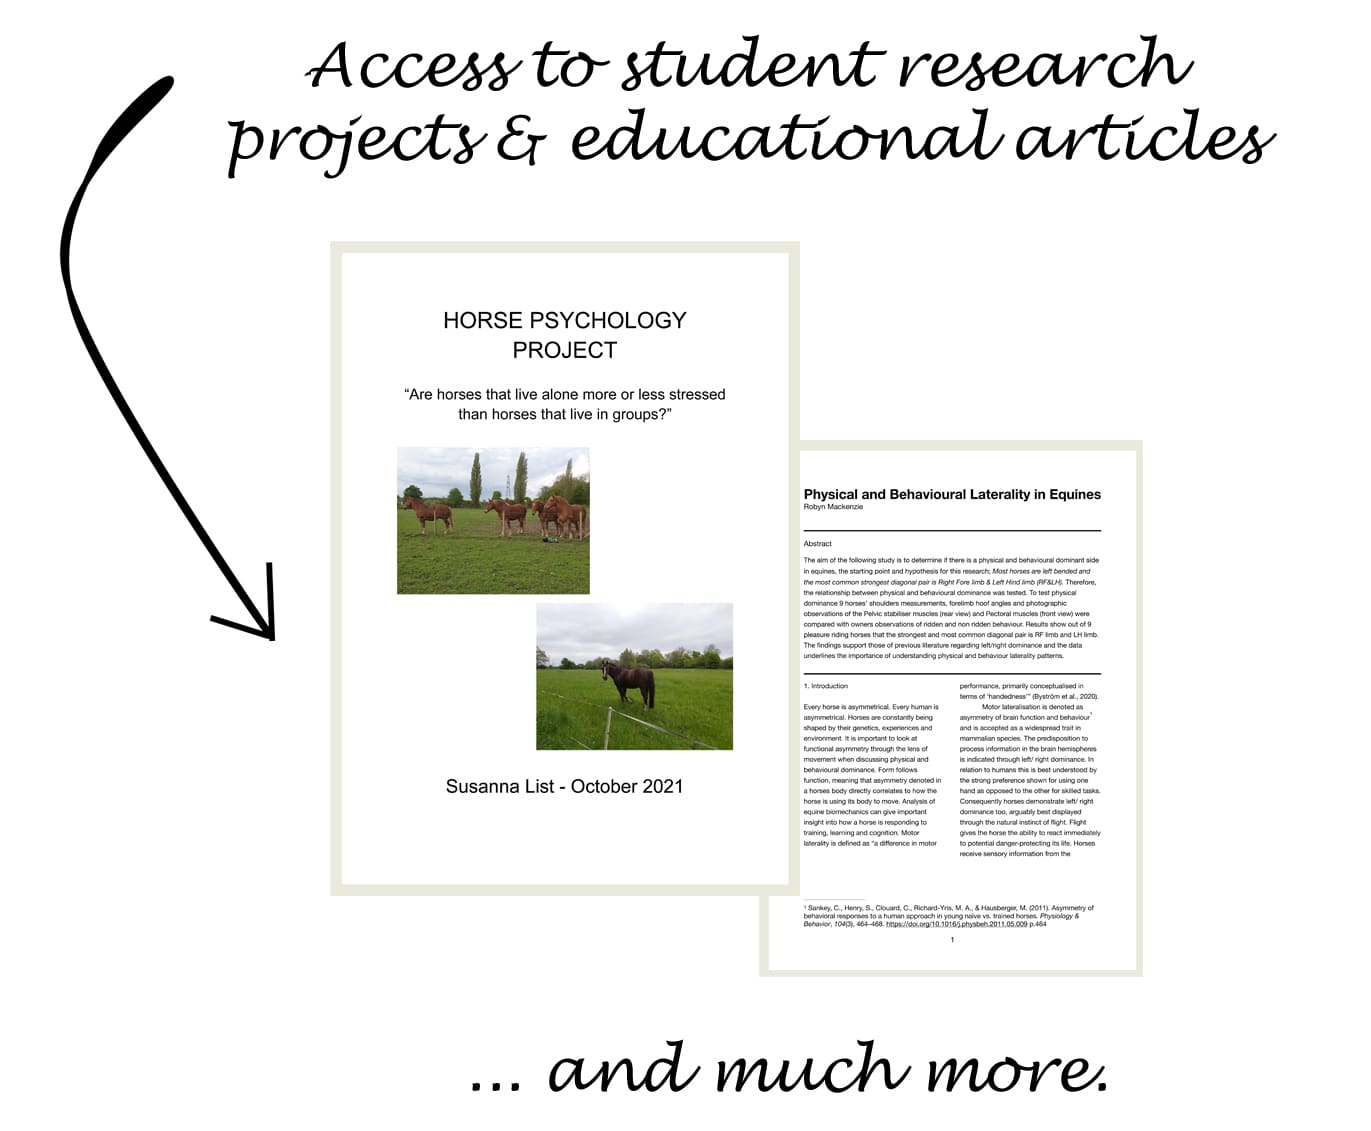 IH Equine Membership Club offers access to student research & educational articles